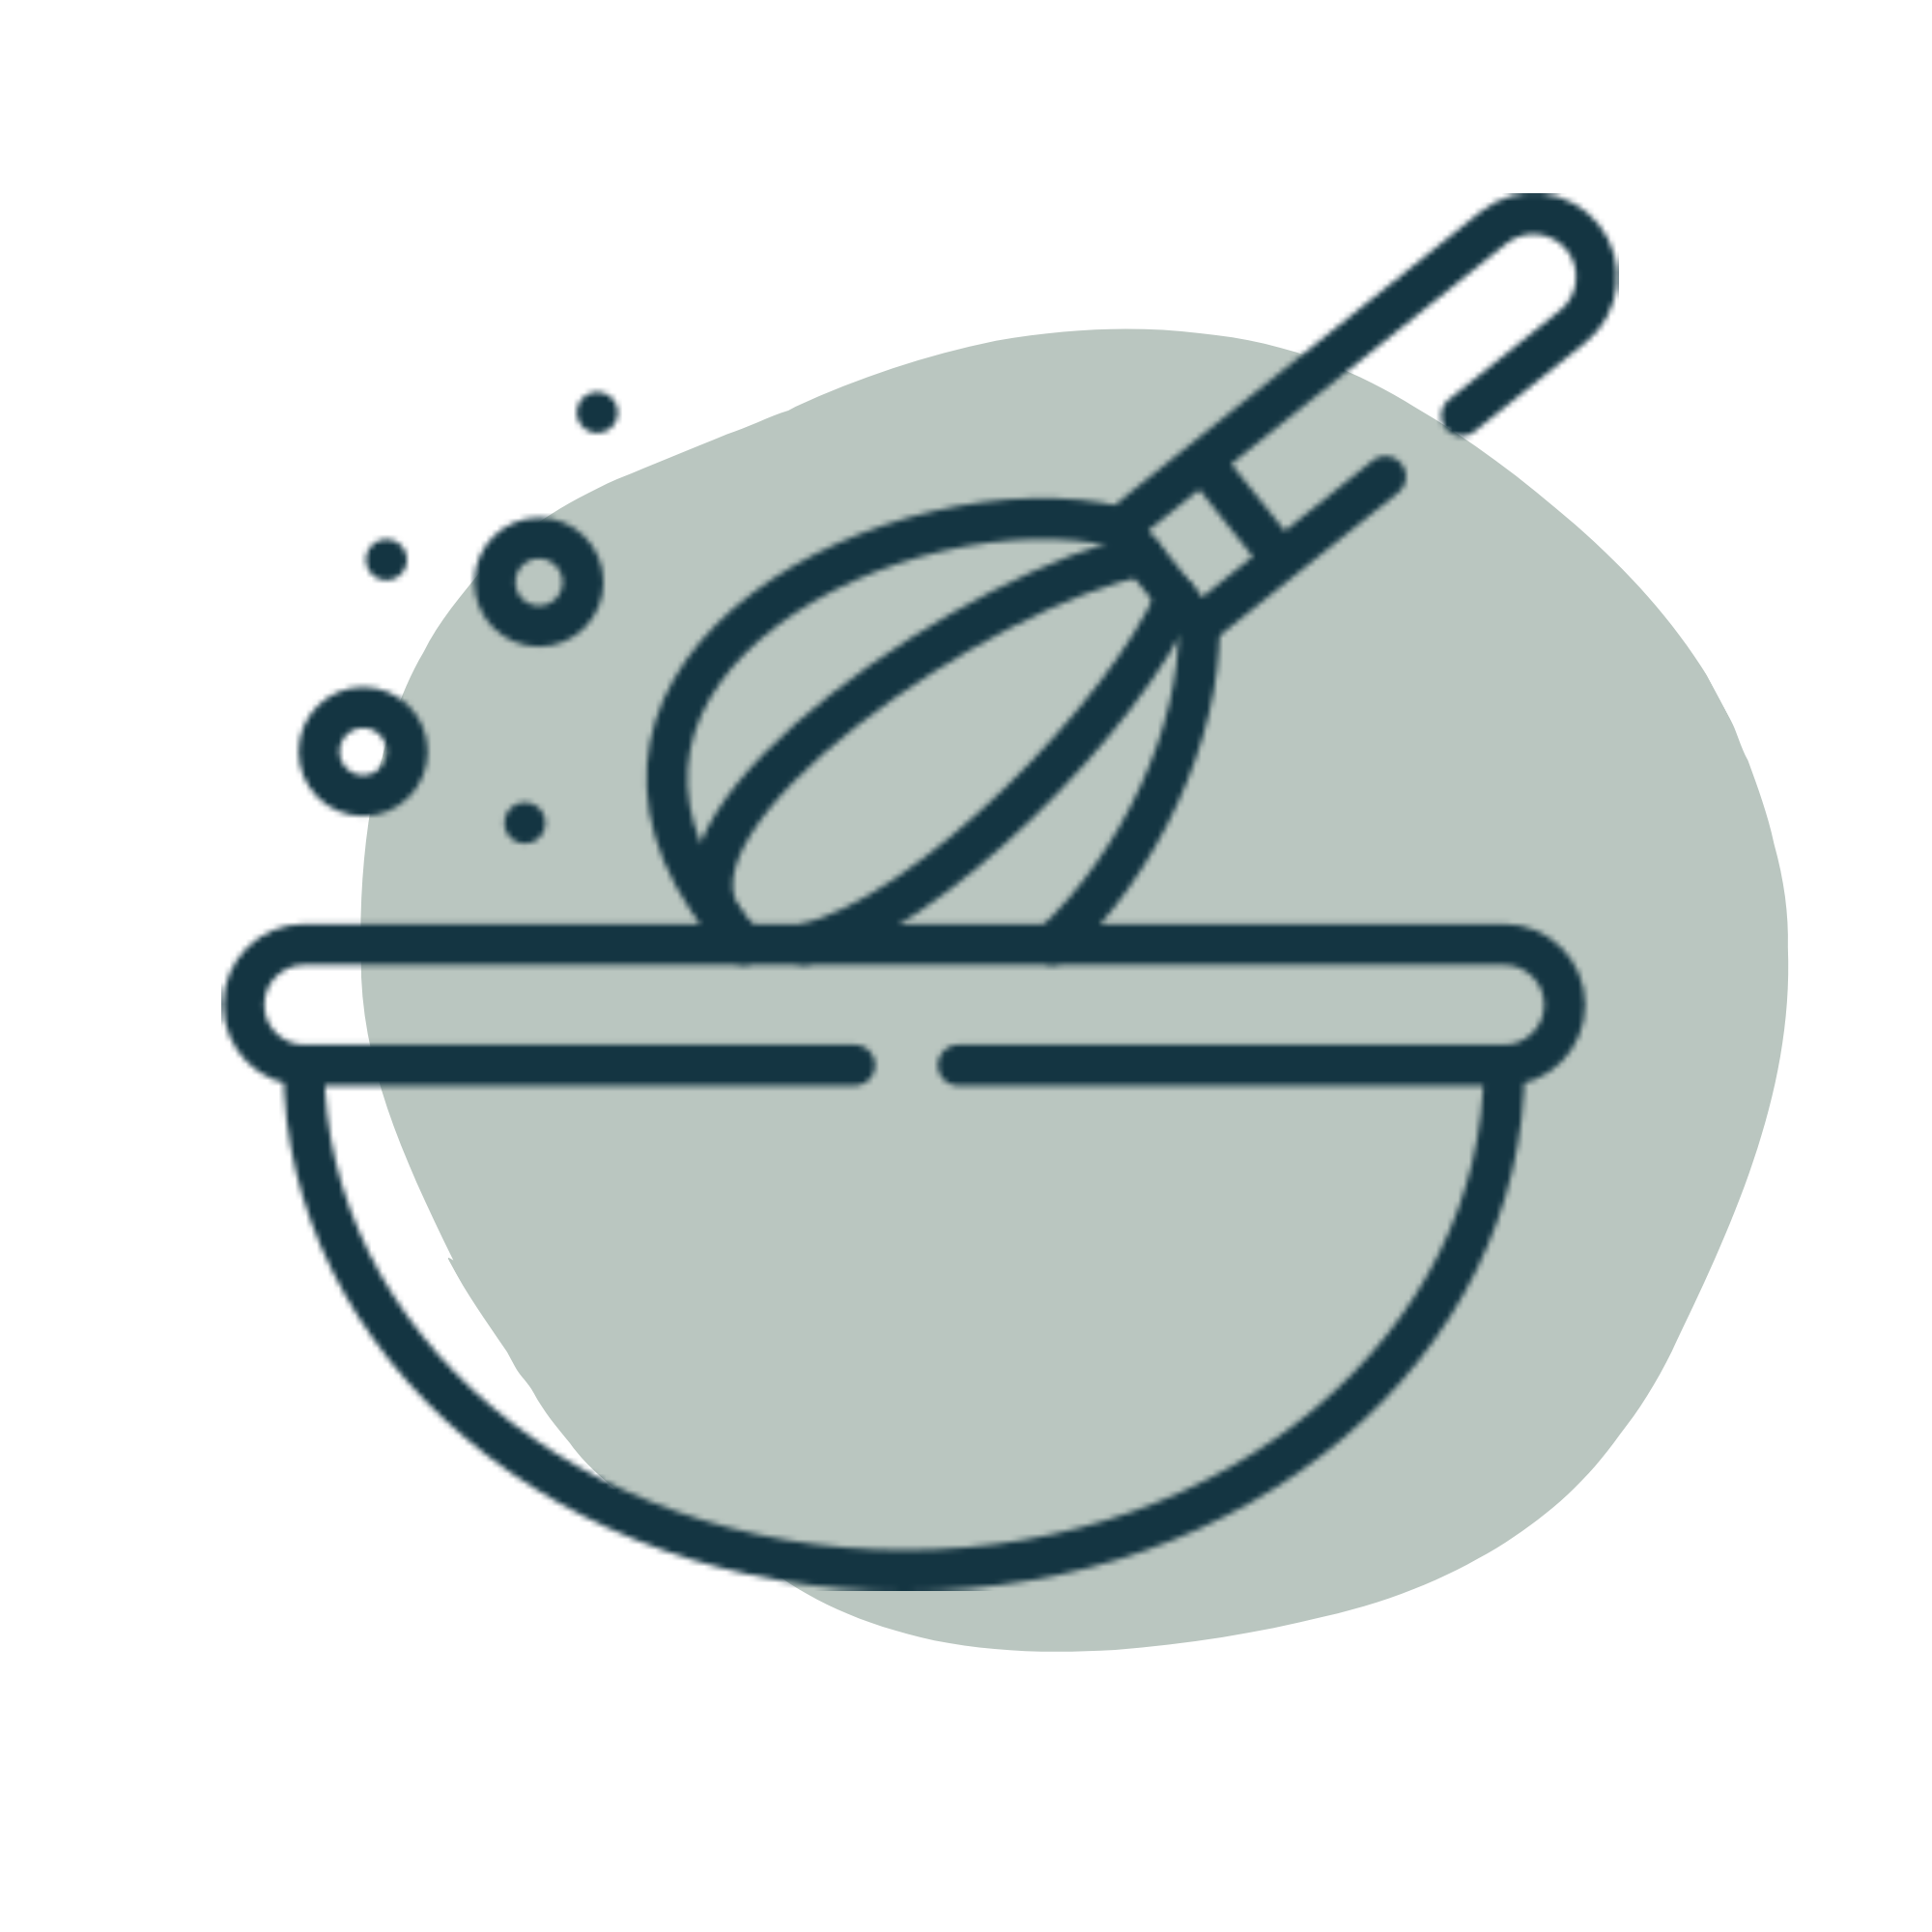 A icon of a whisk and bowl with blue background to represent customer segment.